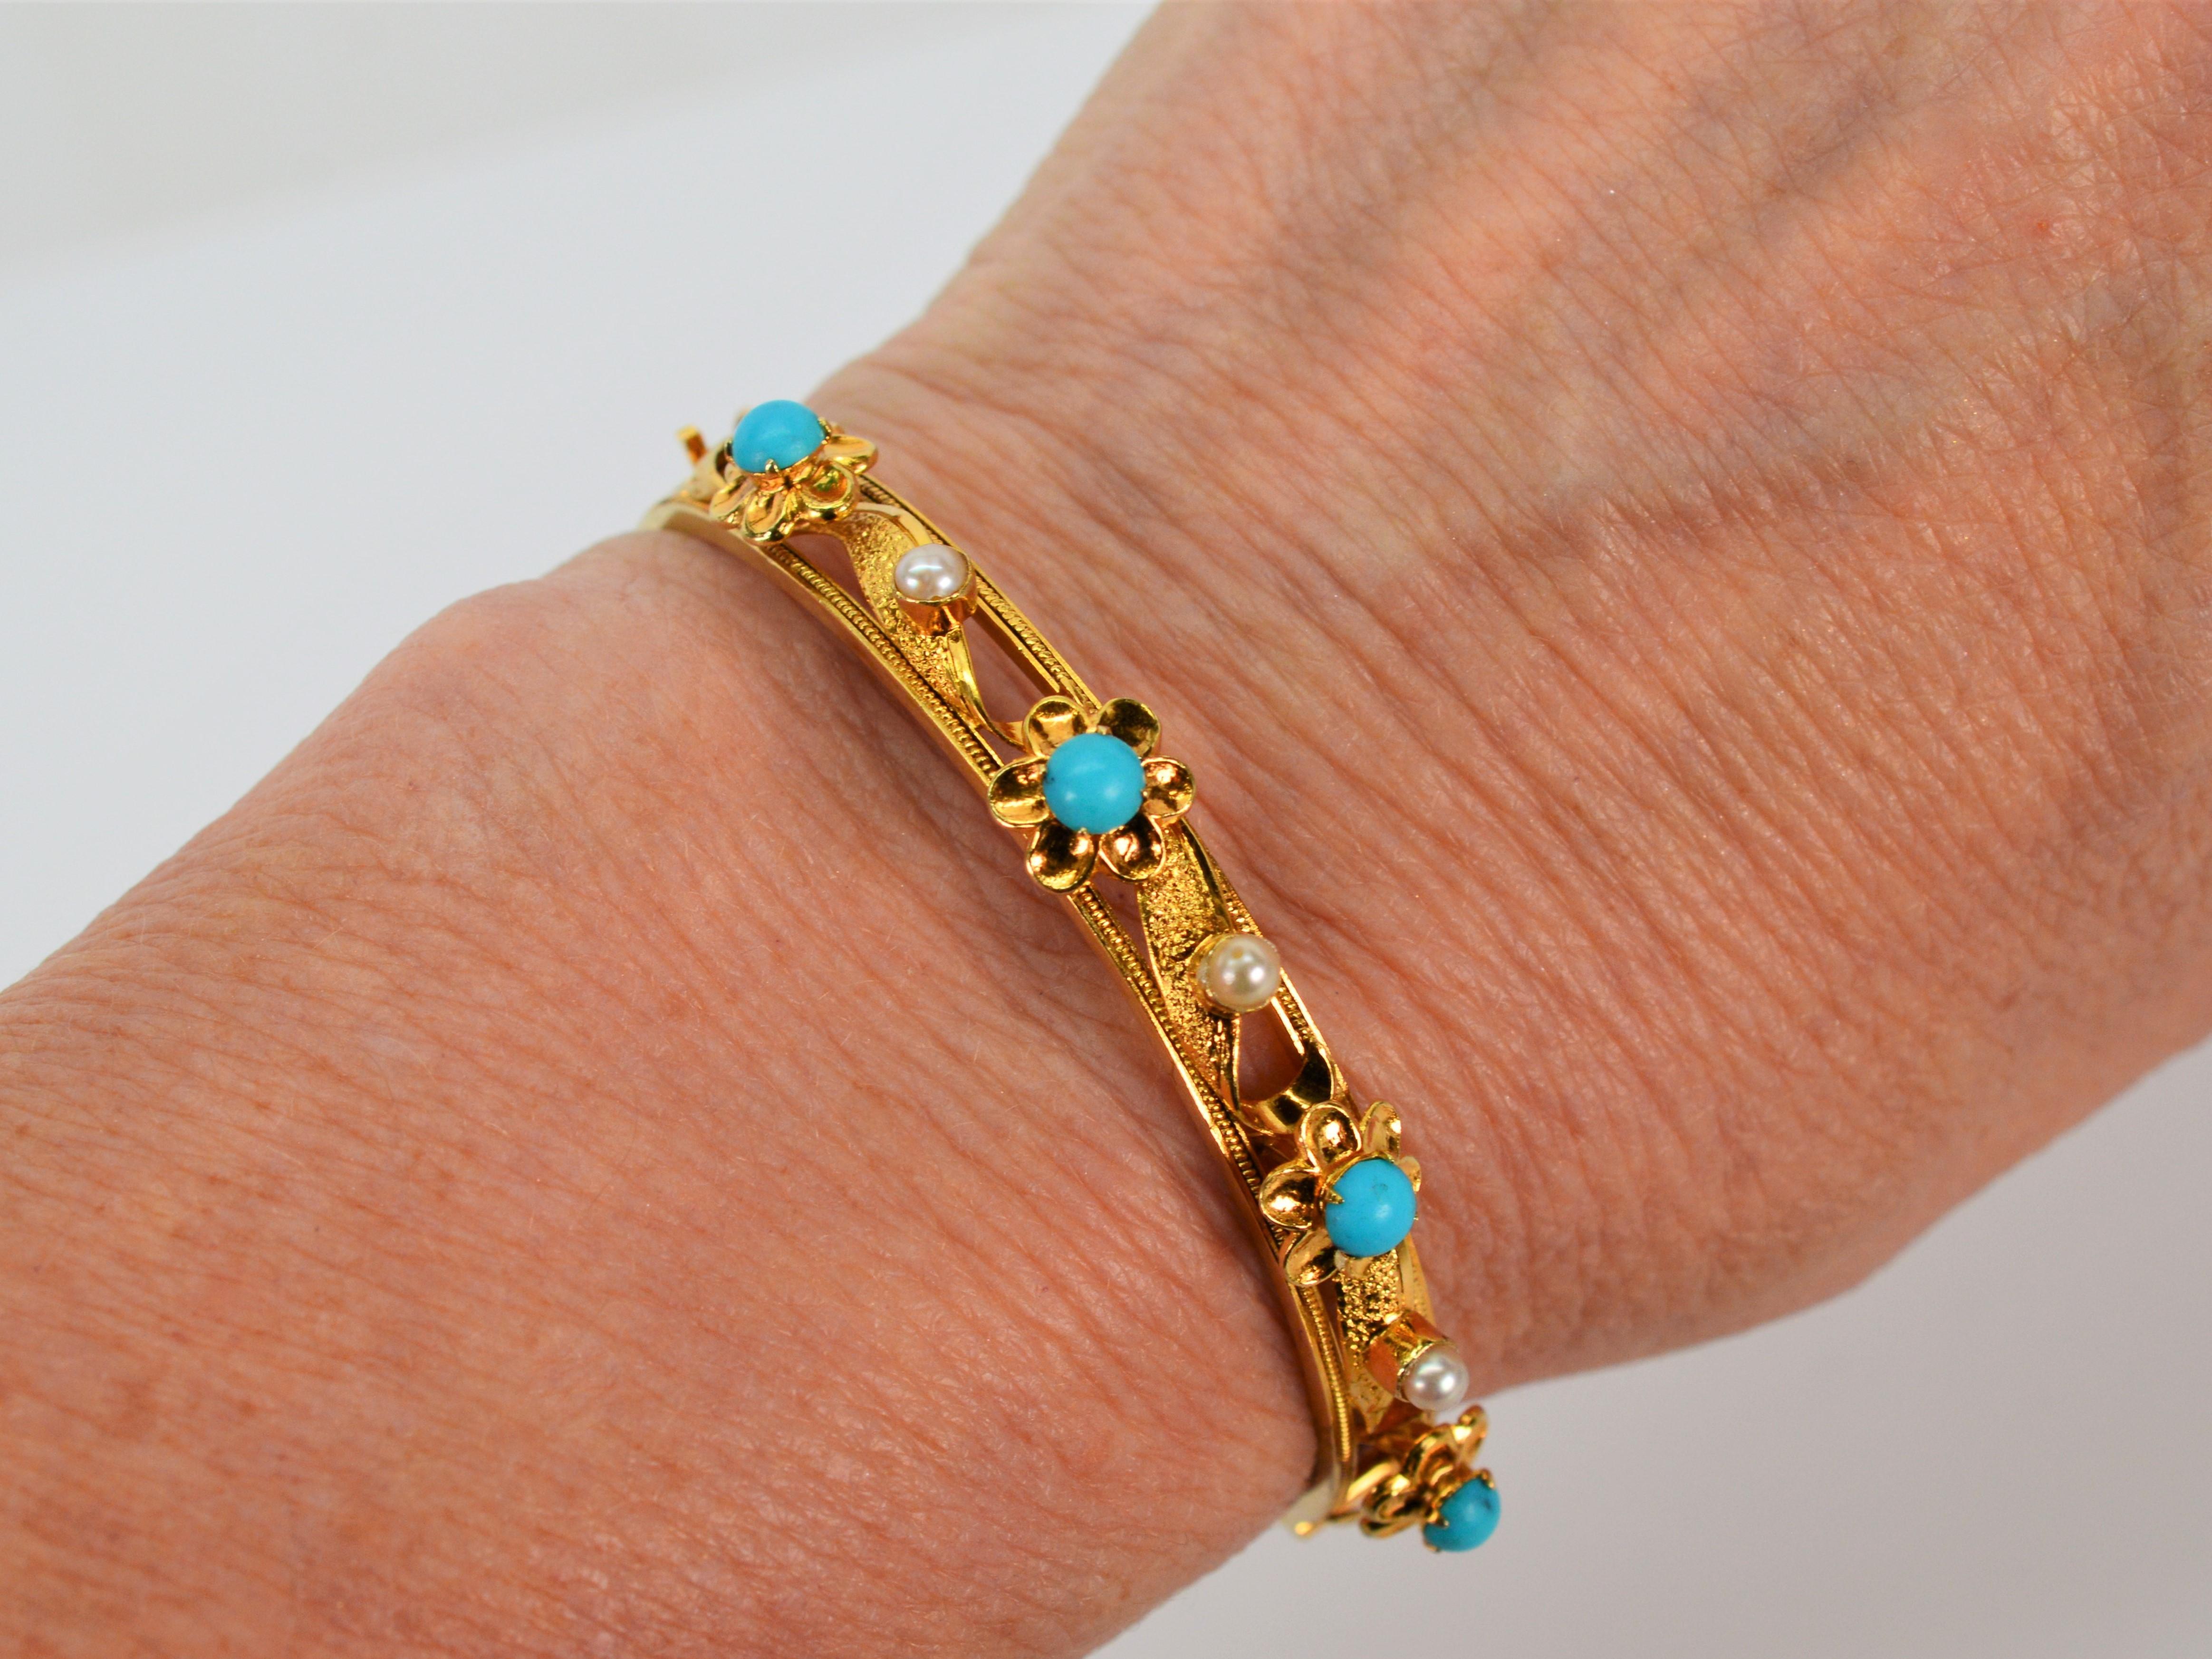 Round Cut 14 Karat Yellow Gold Filigree Bangle Bracelet with Turquoise and Pearl Accents